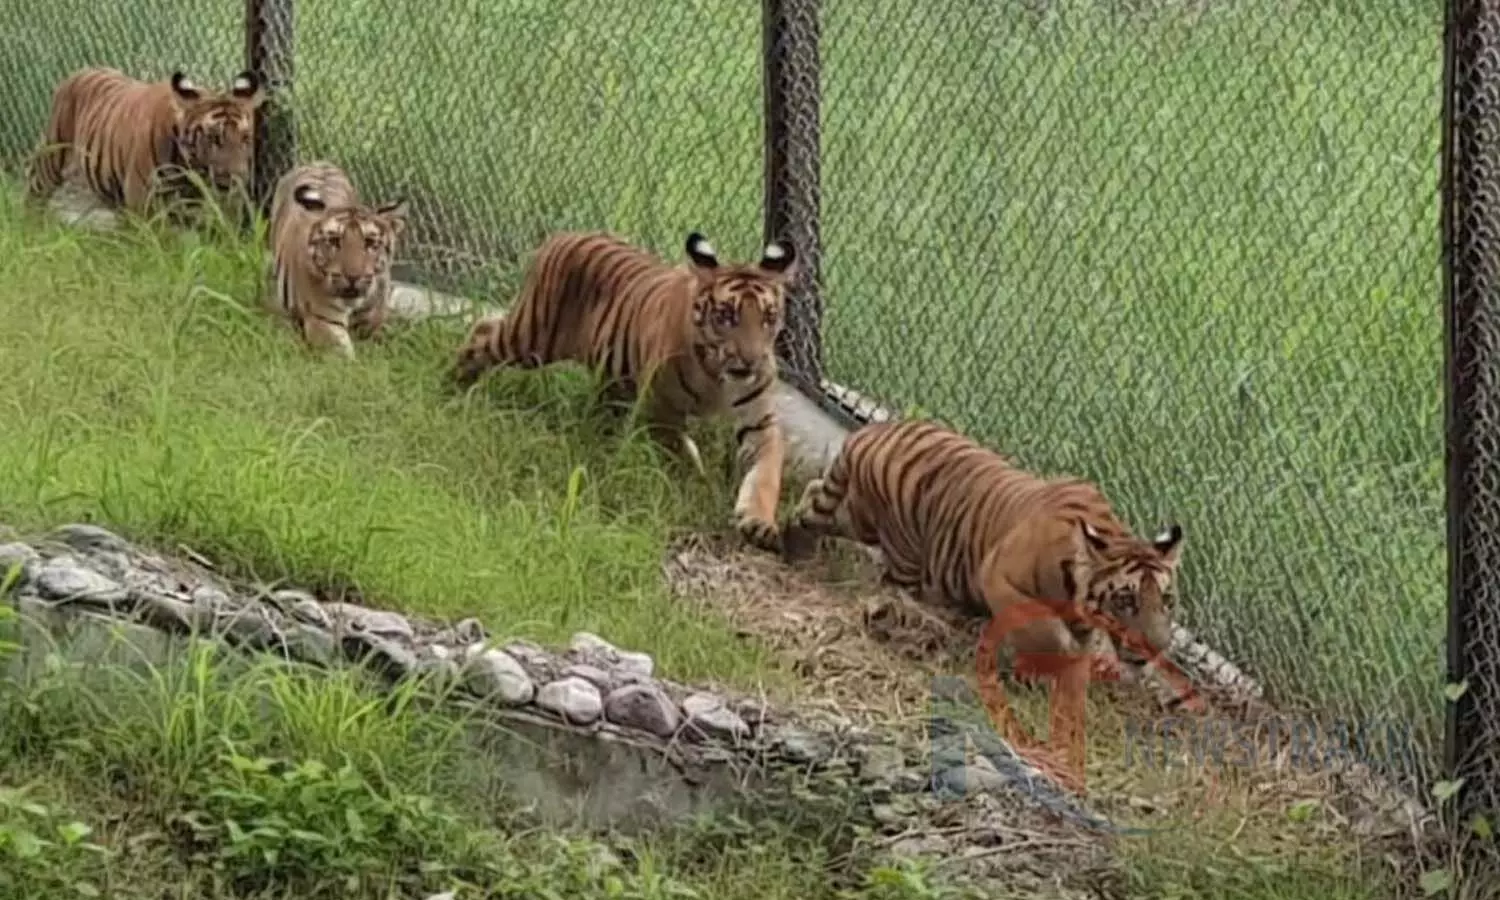 Four new cubs arrived in Lucknow Zoo